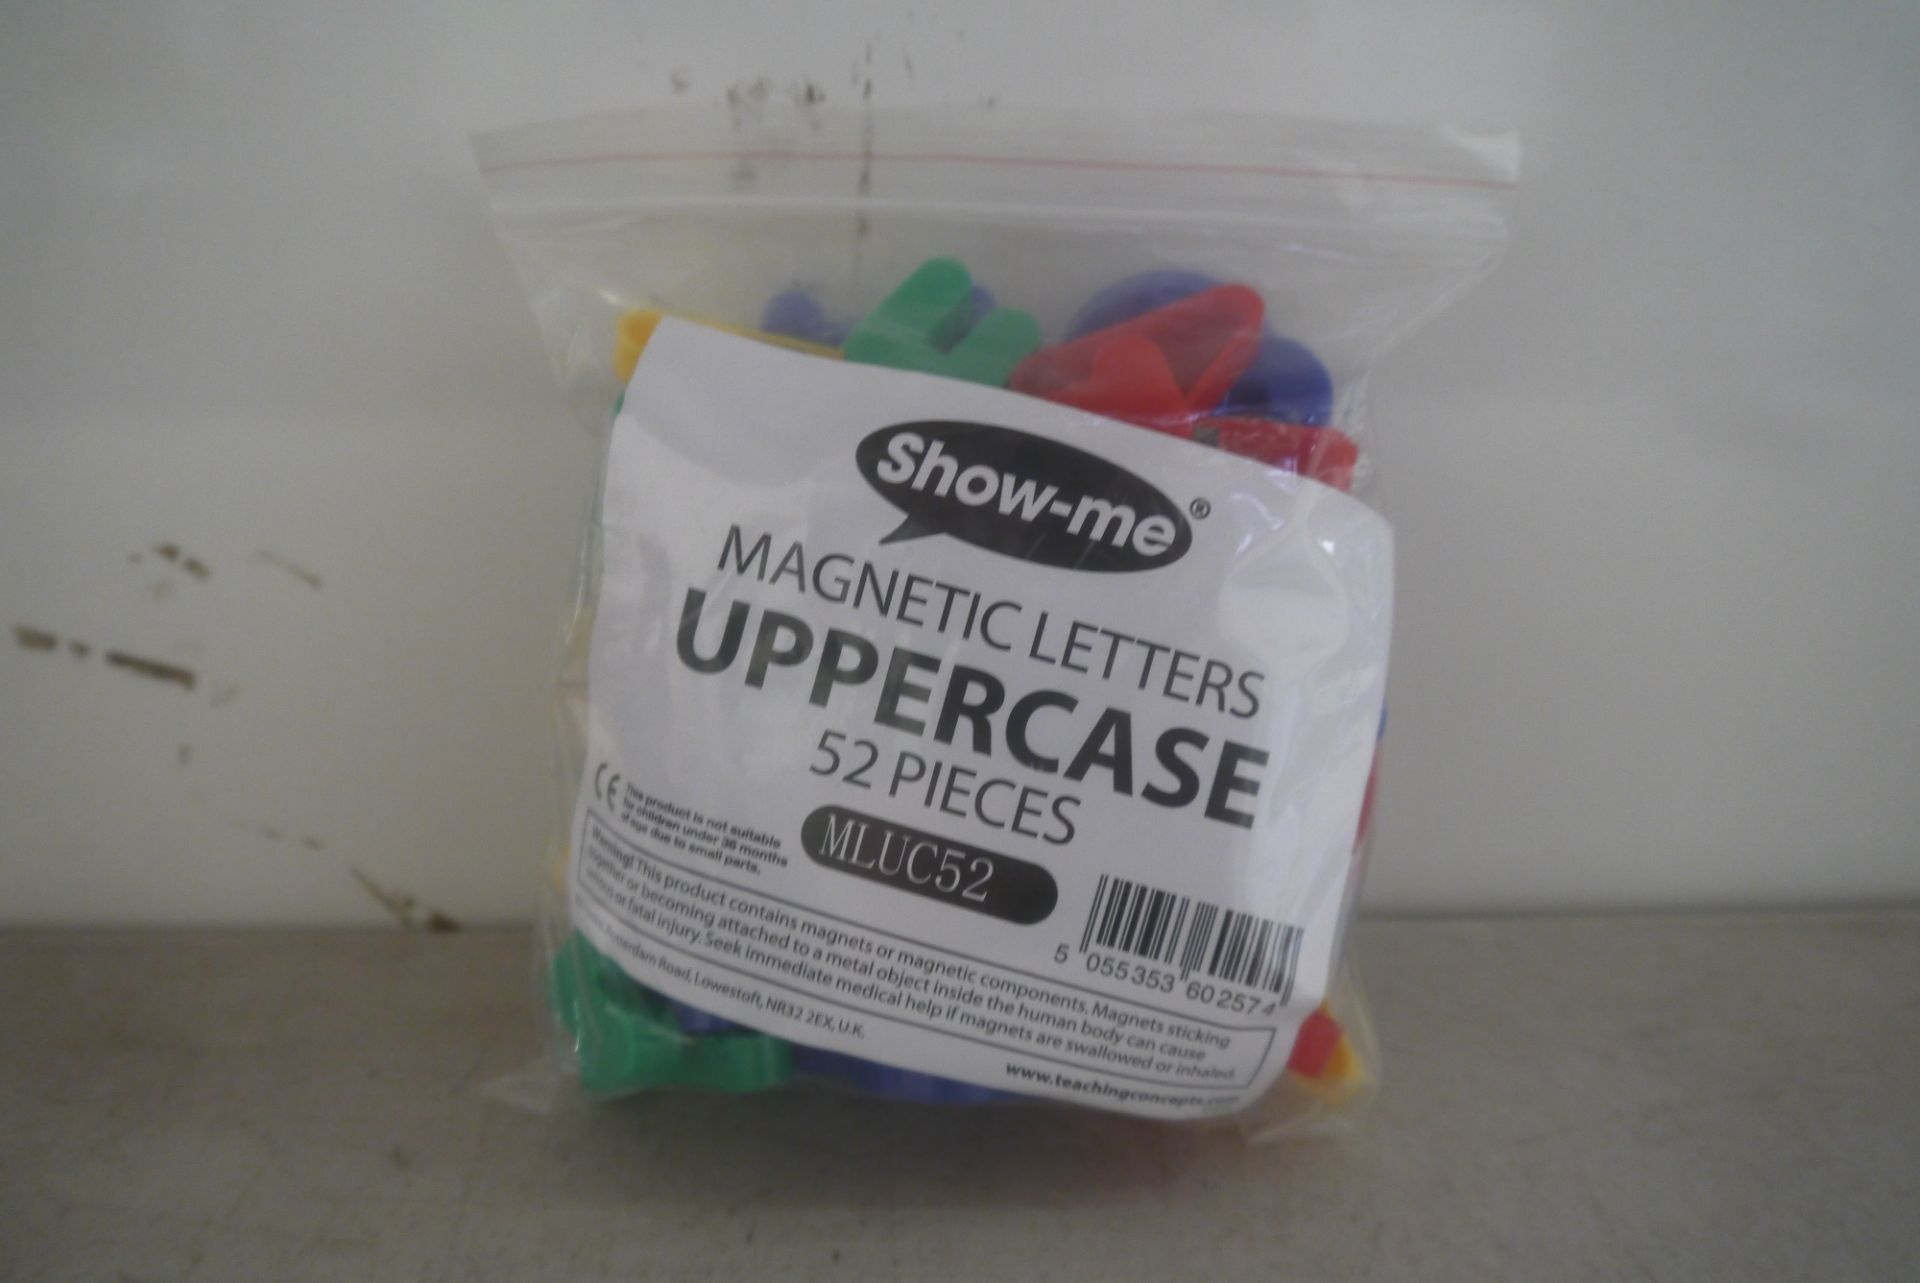 Box containing 10x Show-Me magnetic letters uppercase, 52 pieces, all brand new and packaged.